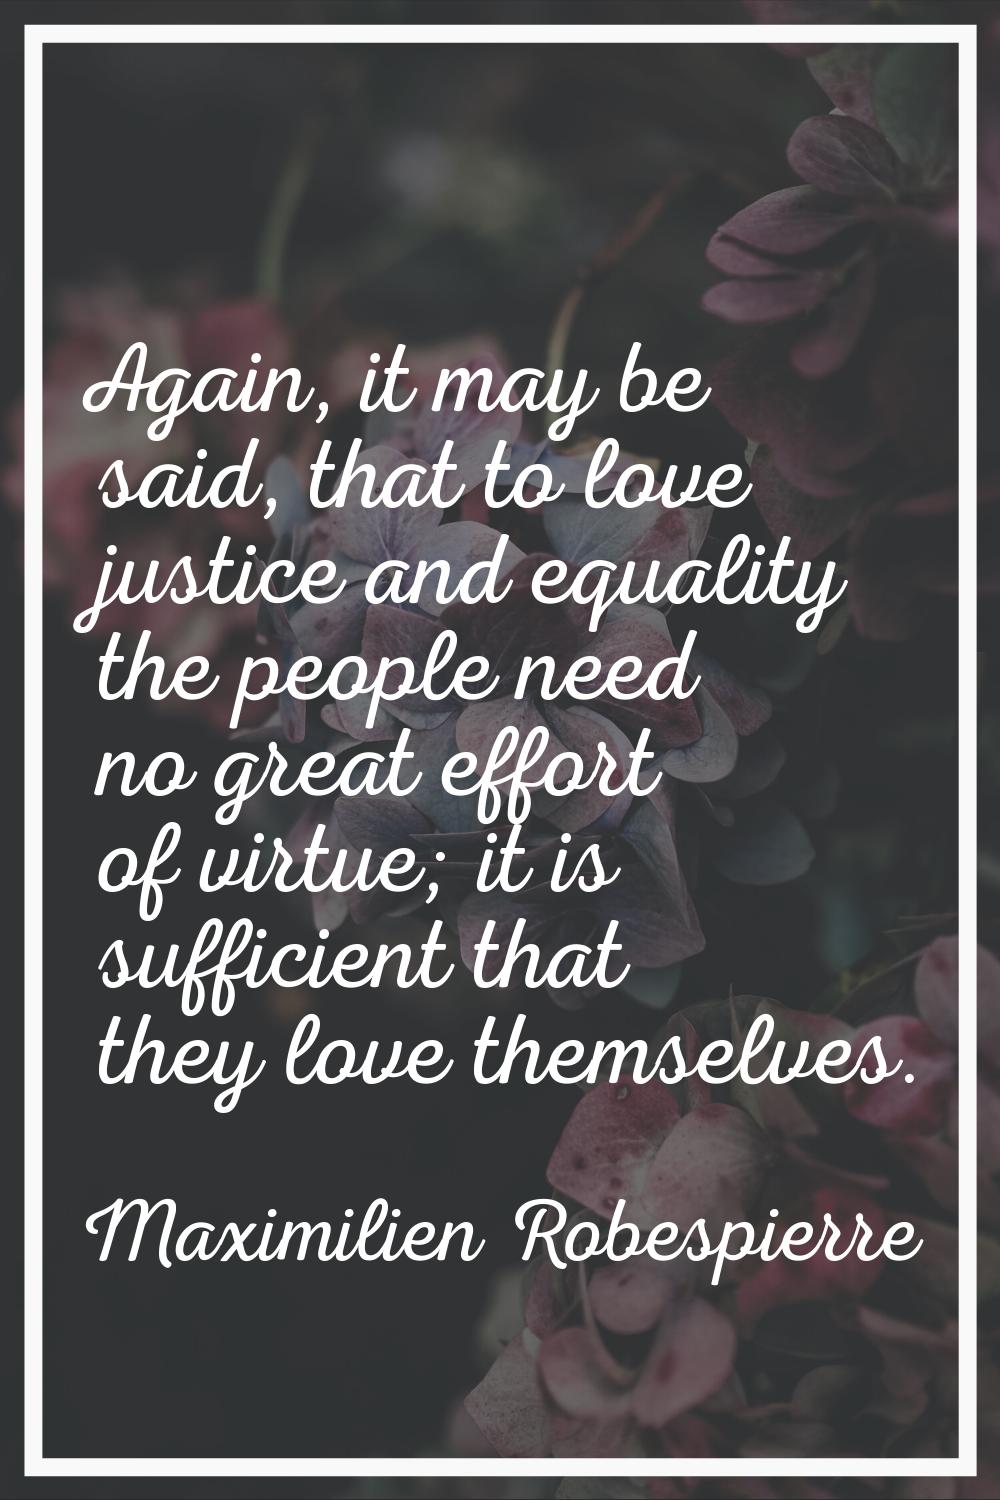 Again, it may be said, that to love justice and equality the people need no great effort of virtue;